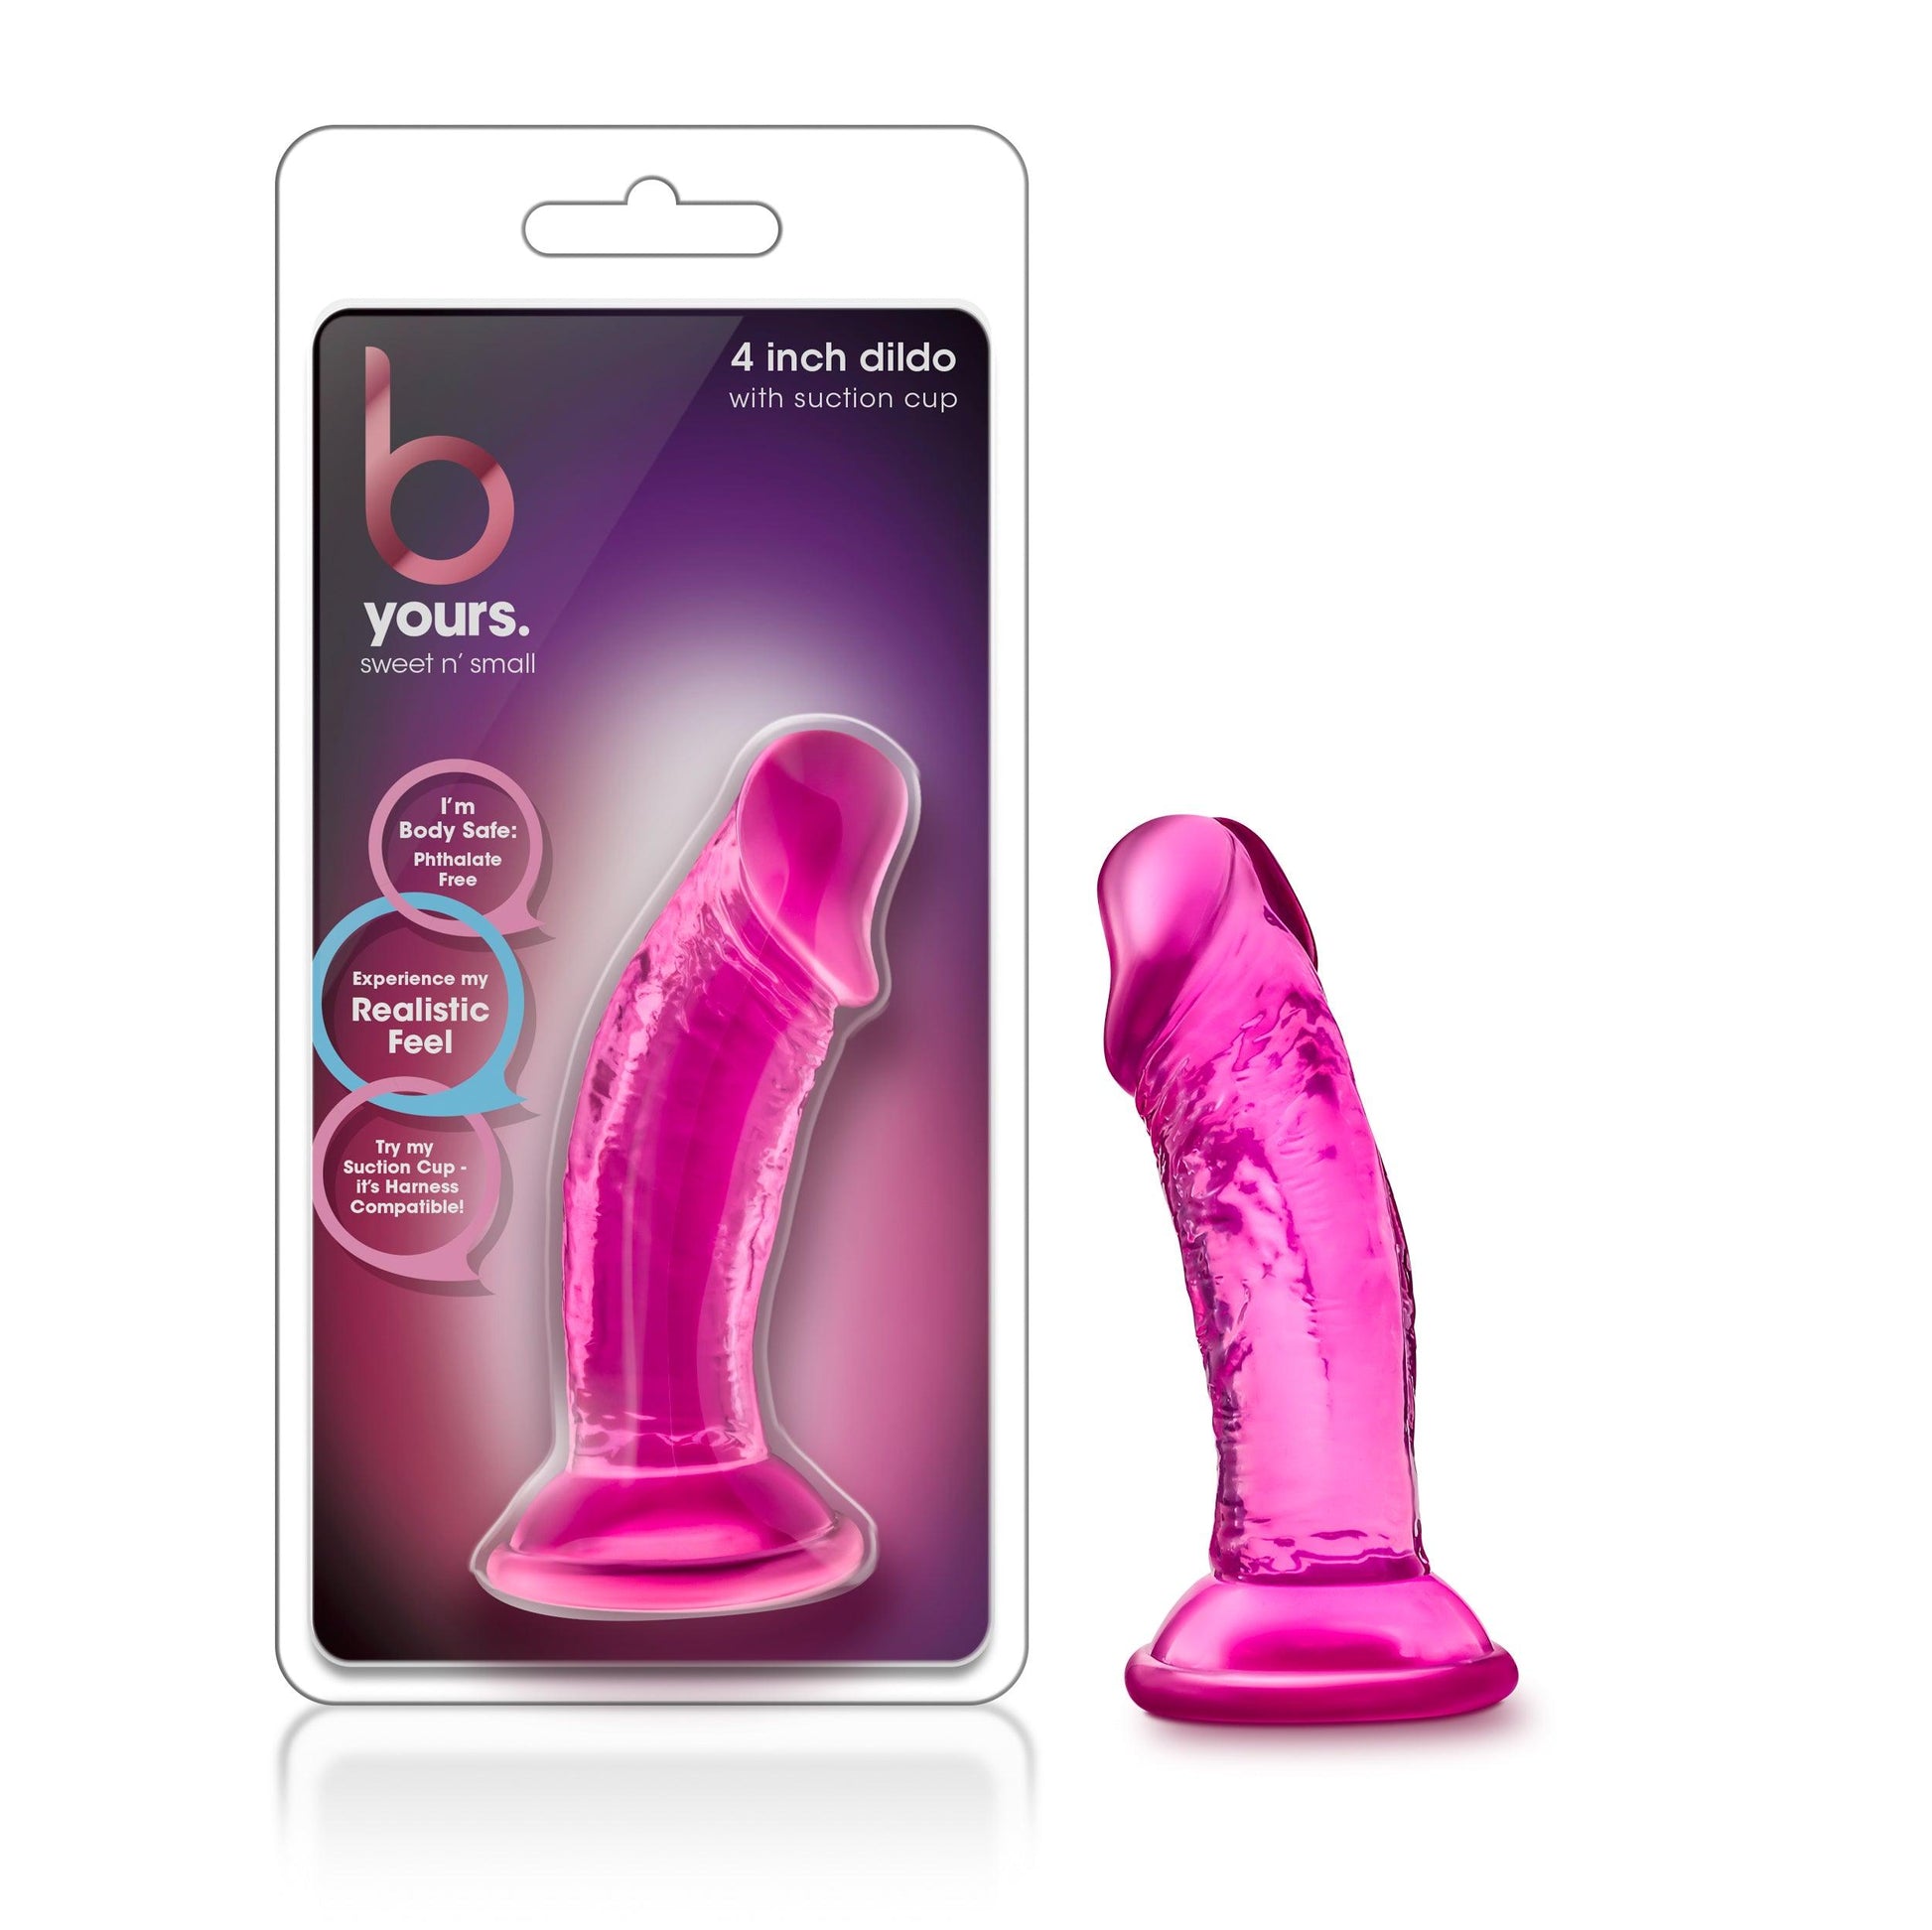 B Yours Sweet N Small Dildo with Suction Cup 4in Purple - Take A Peek